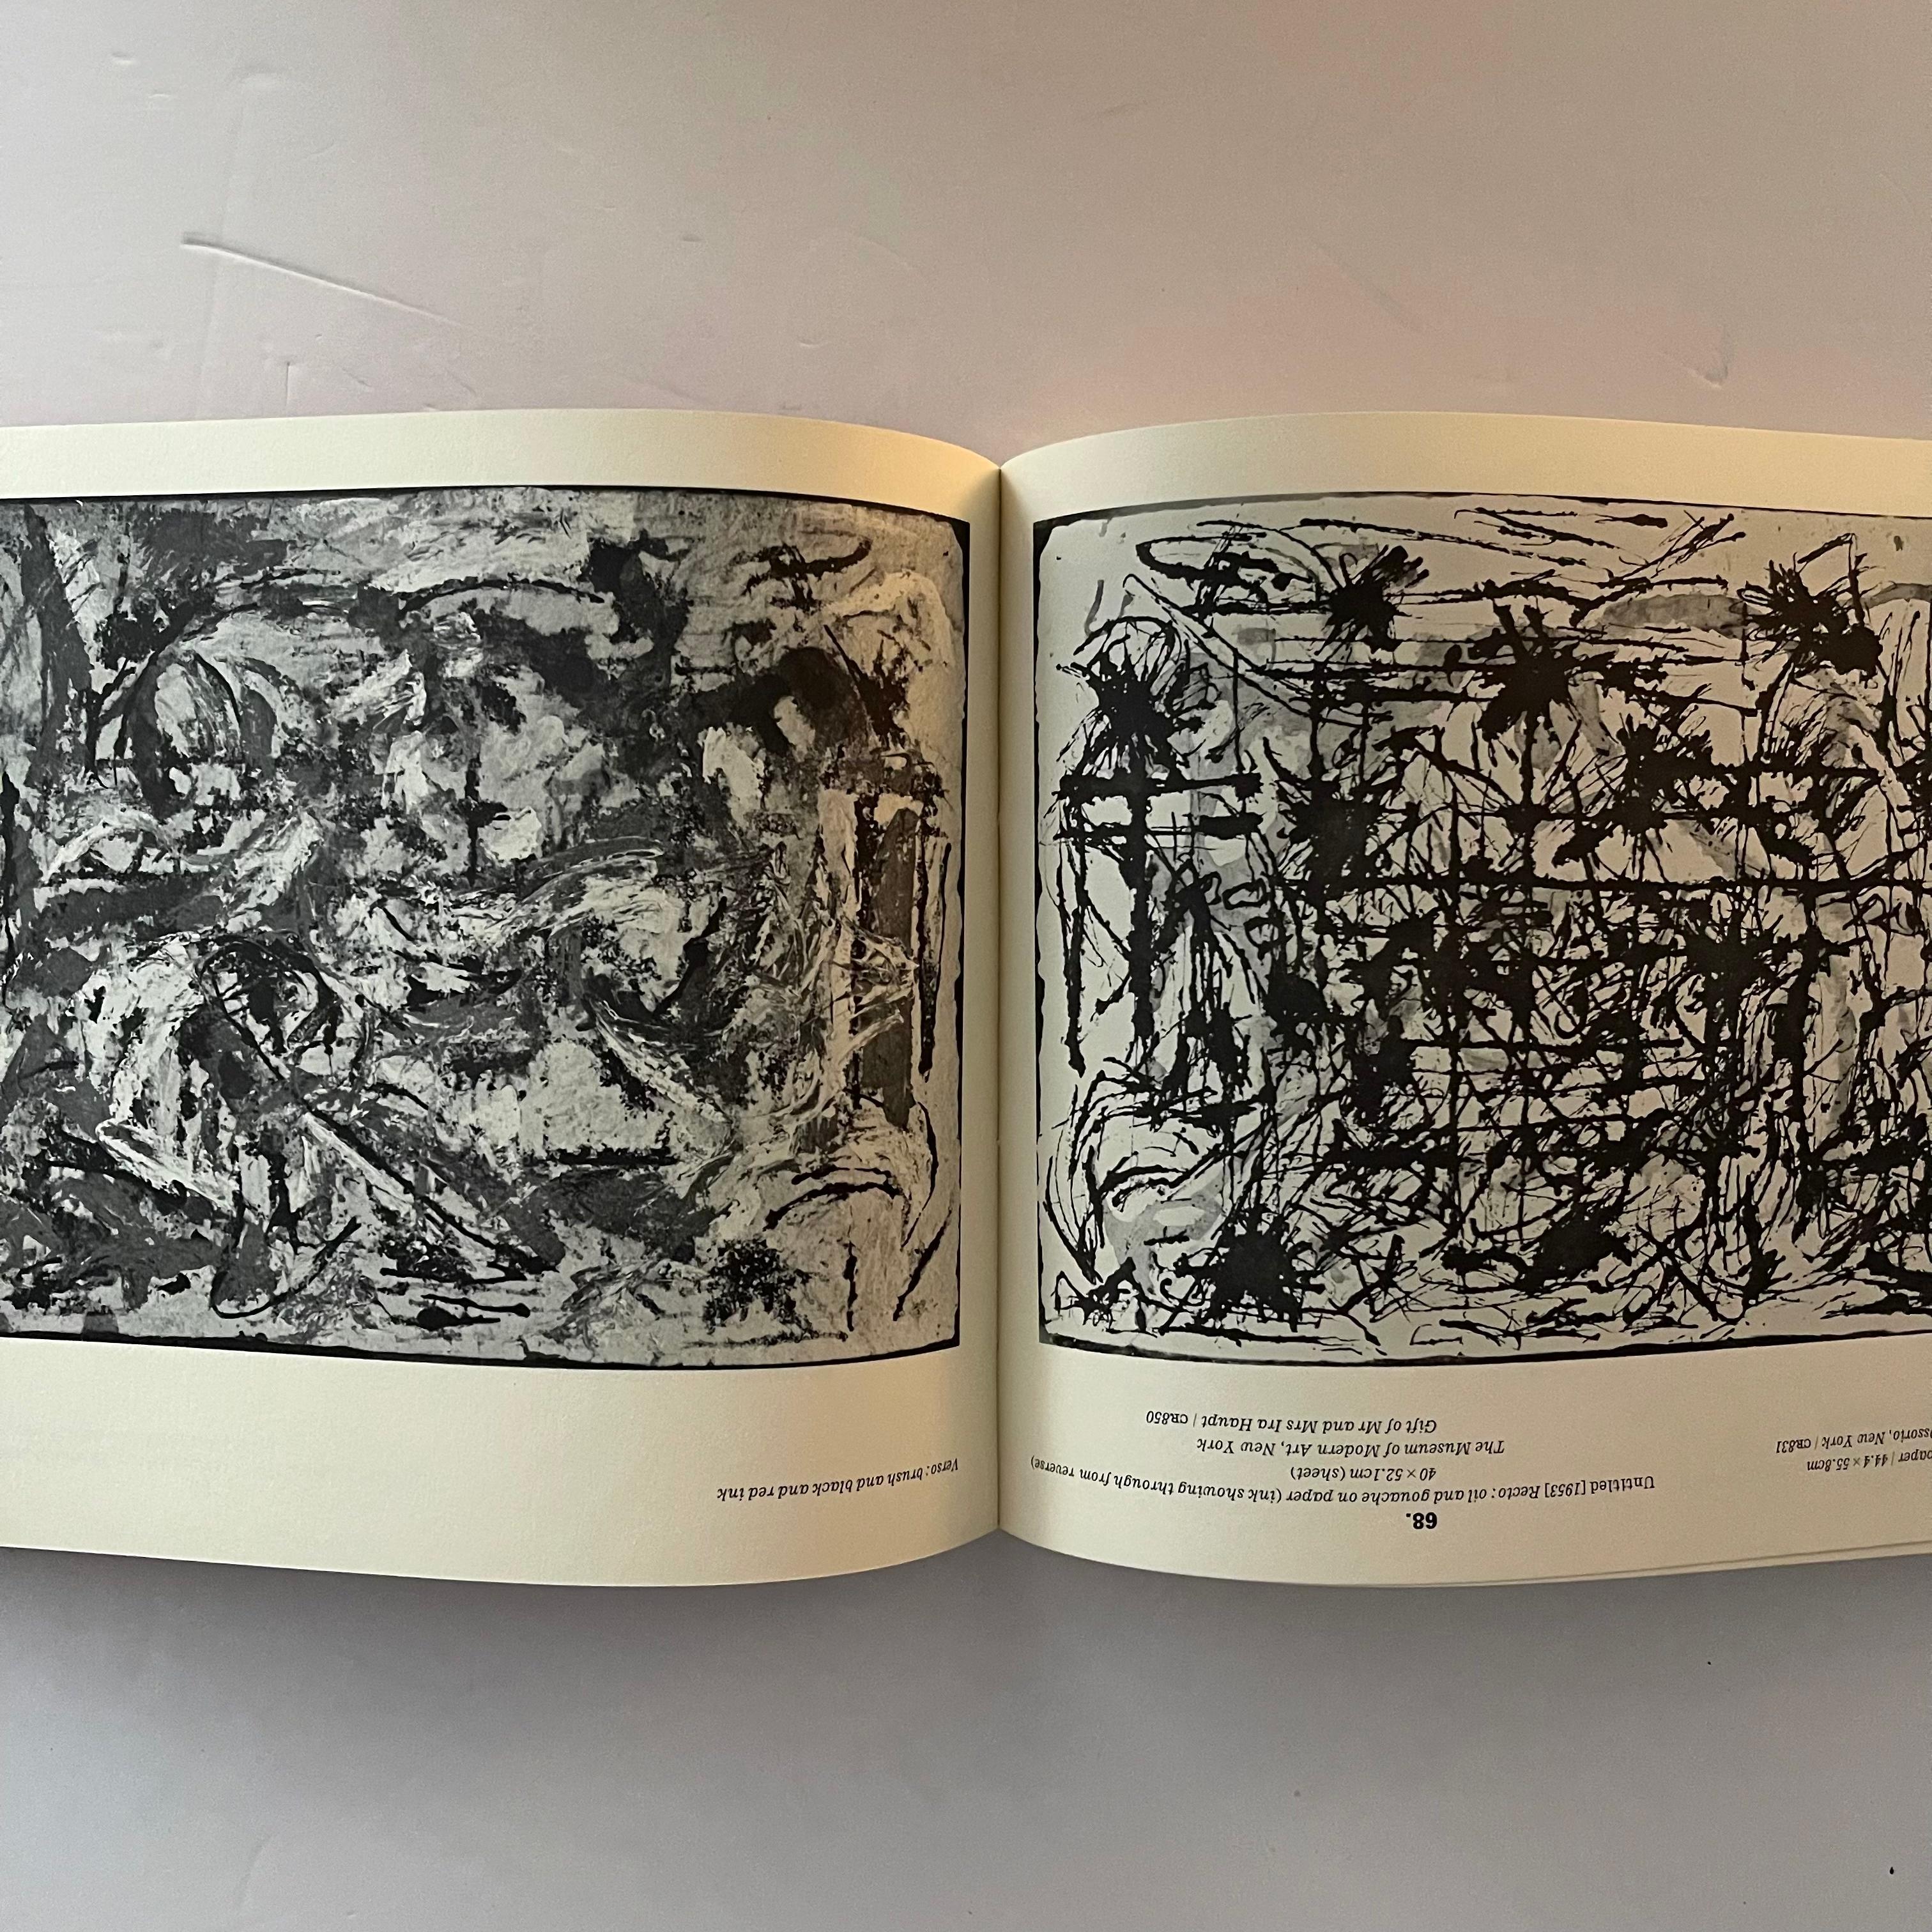 Late 20th Century Jackson Pollock: Drawing into Painting - Bernice Rose - 1st edition, 1980